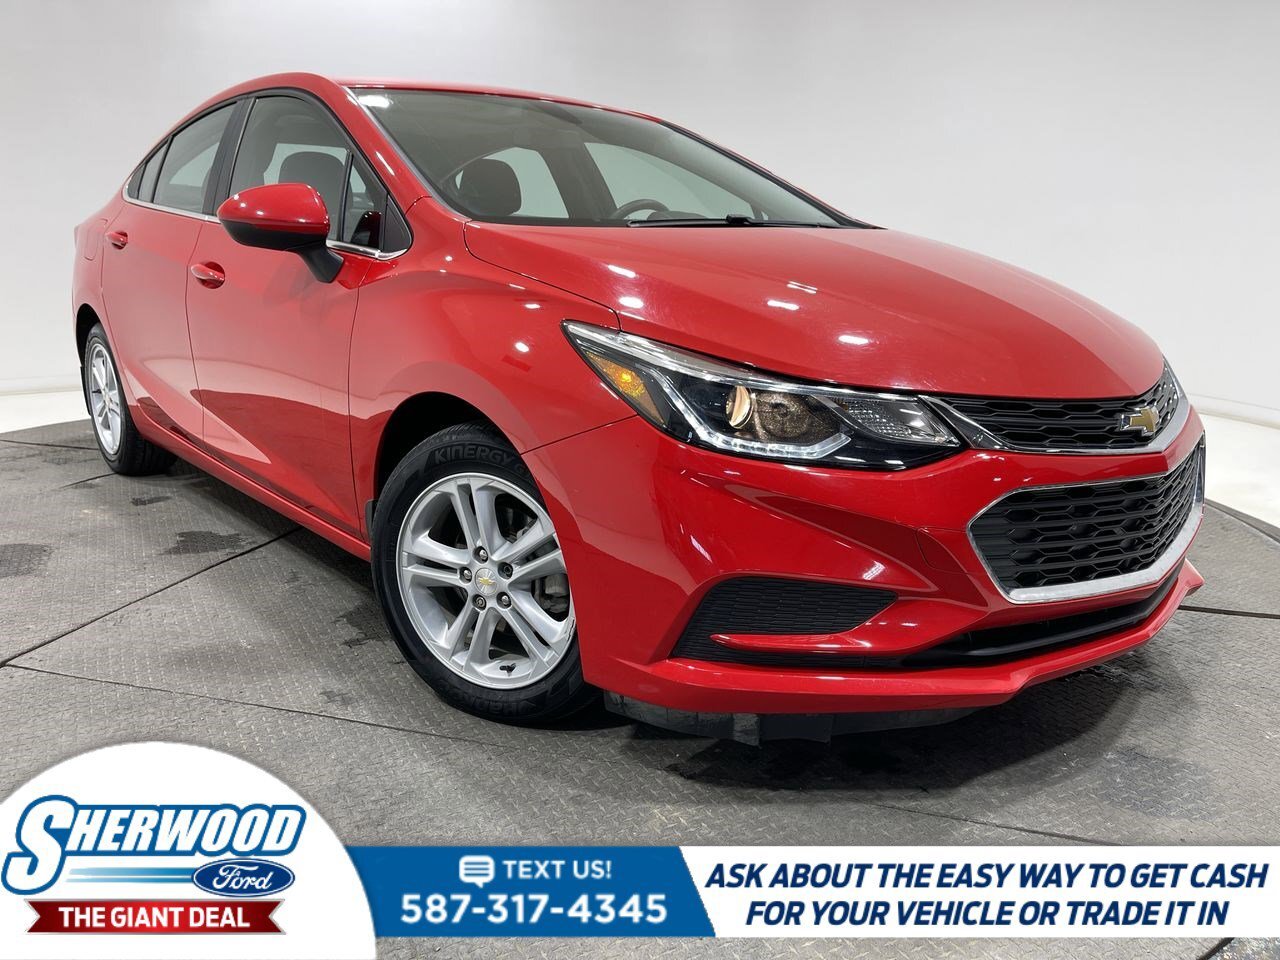 2017 Chevrolet Cruze LT- $0 Down $106 Weekly- CLEAN CARFAX